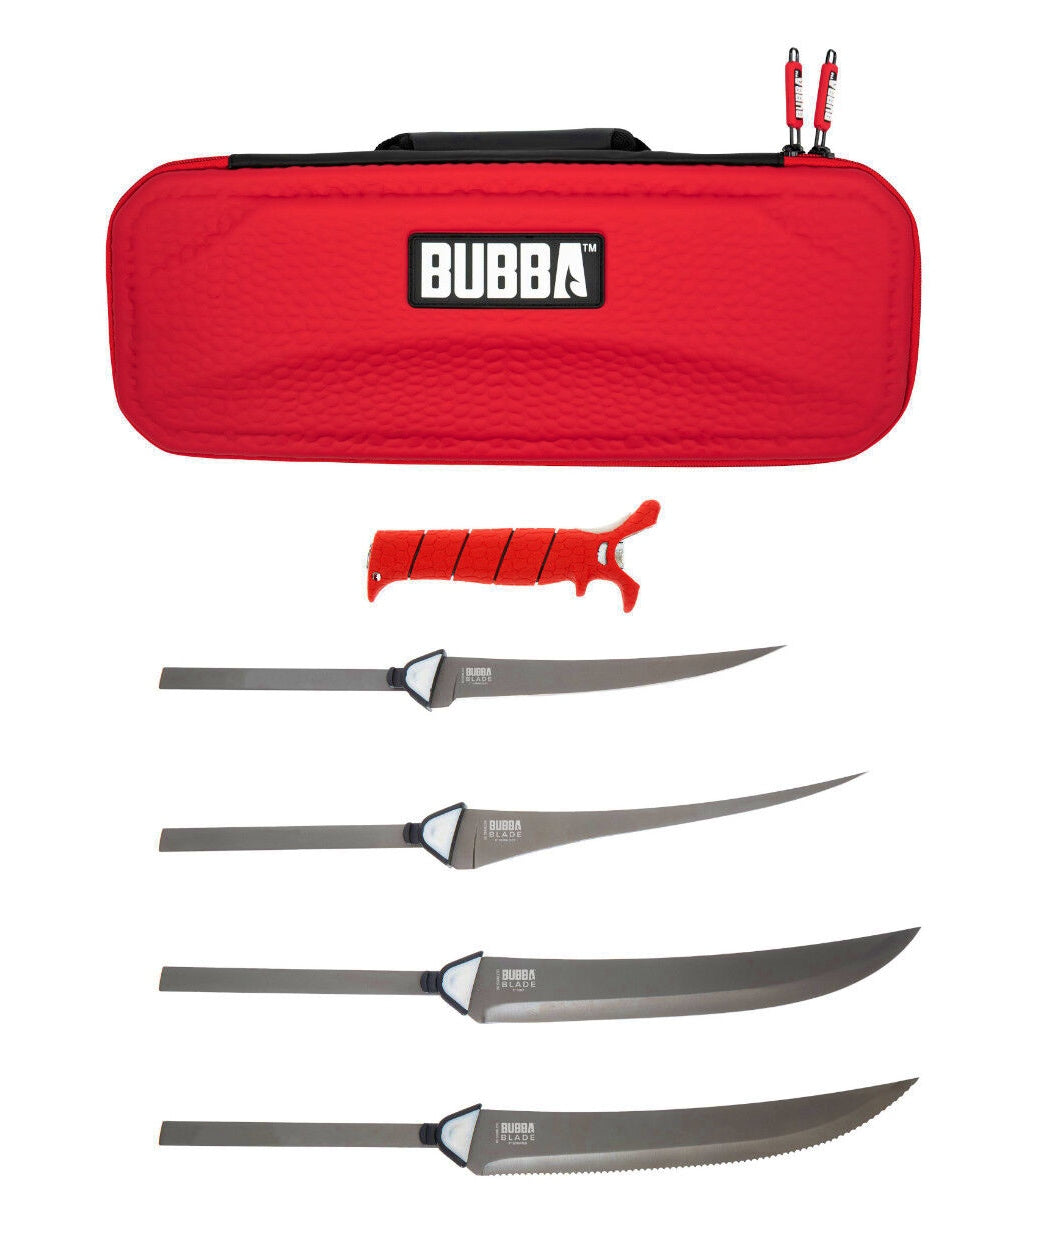 Bubba Blade Multi-Flex Interchangeable Set – Been There Caught